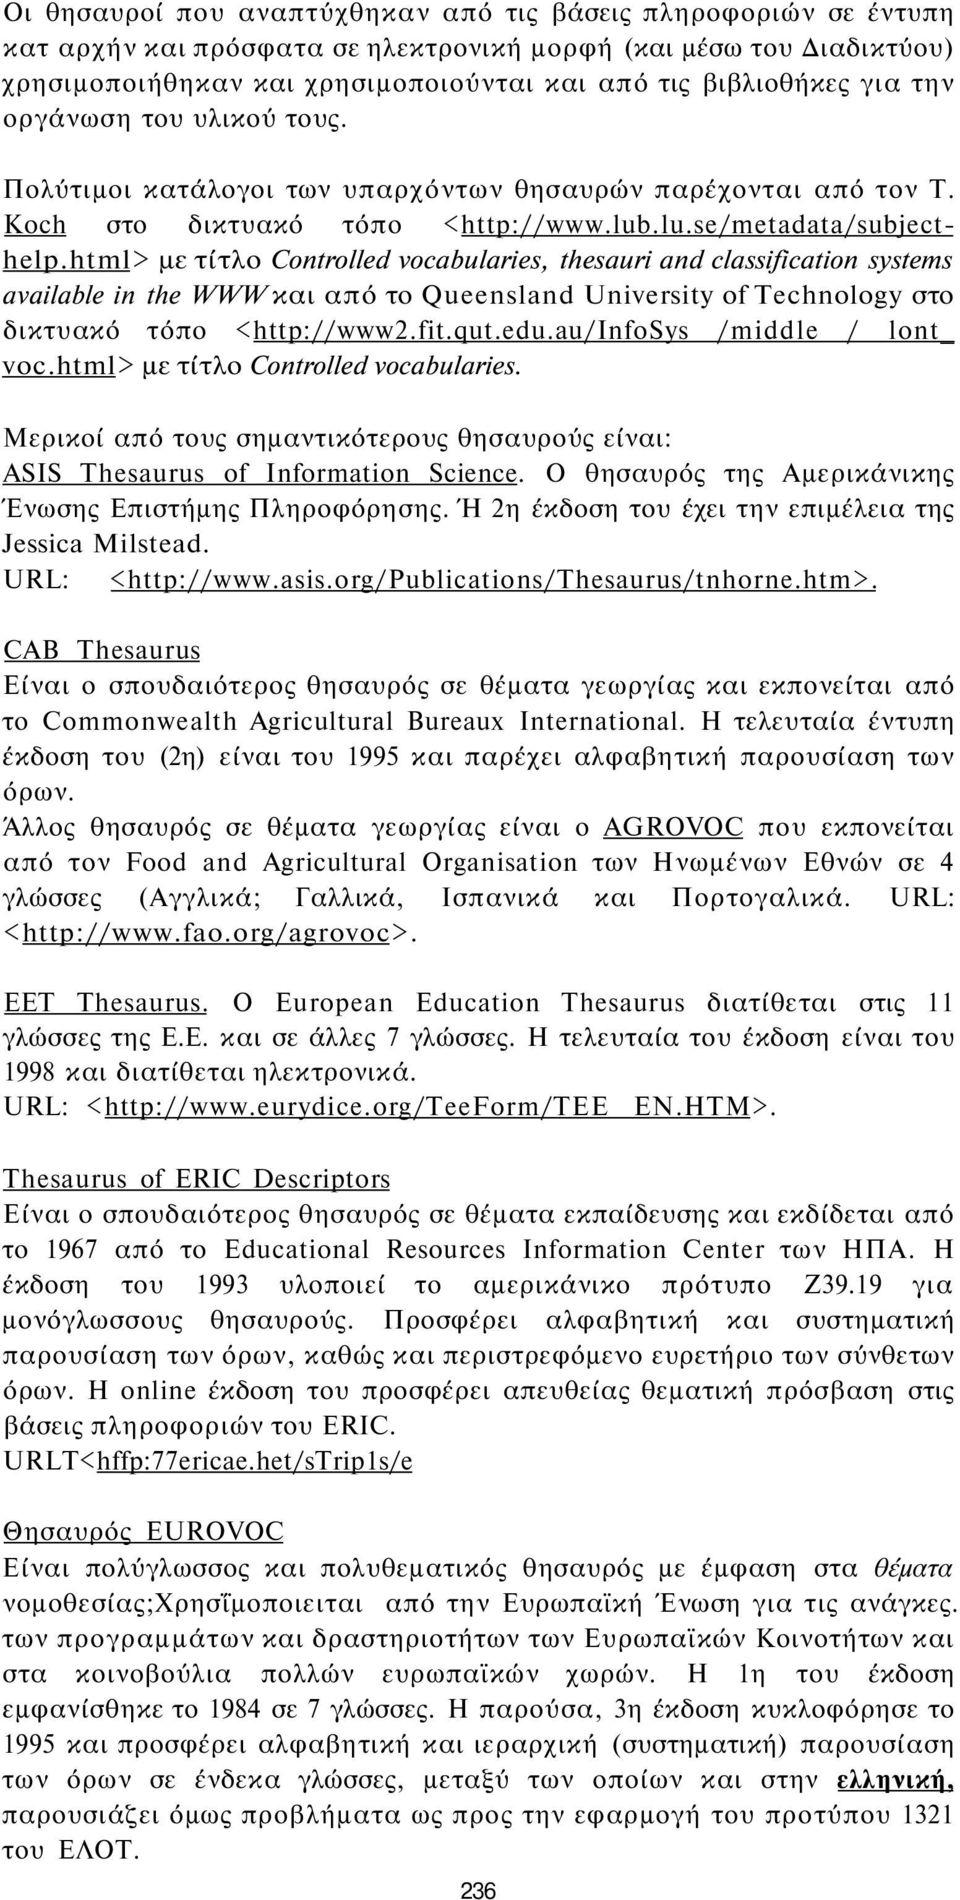 html> με τίτλο Controlled vocabularies, thesauri and classification systems available in the WWW και από το Queensland University of Technology στο δικτυακό τόπο <http://www2.fit.qut.edu.